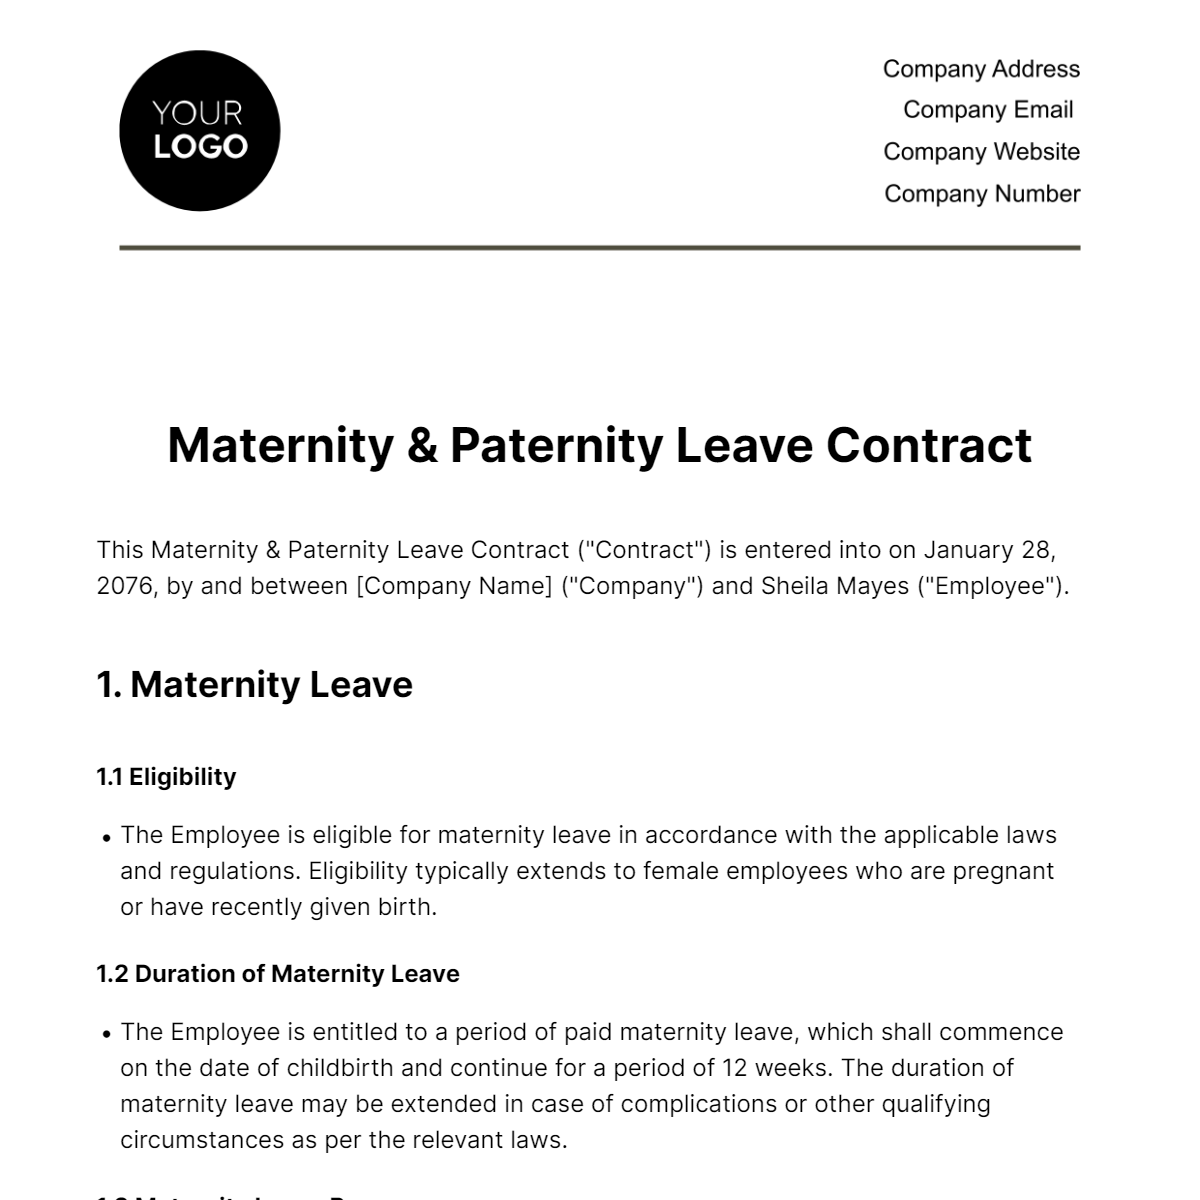 Maternity & Paternity Leave Contract HR Template